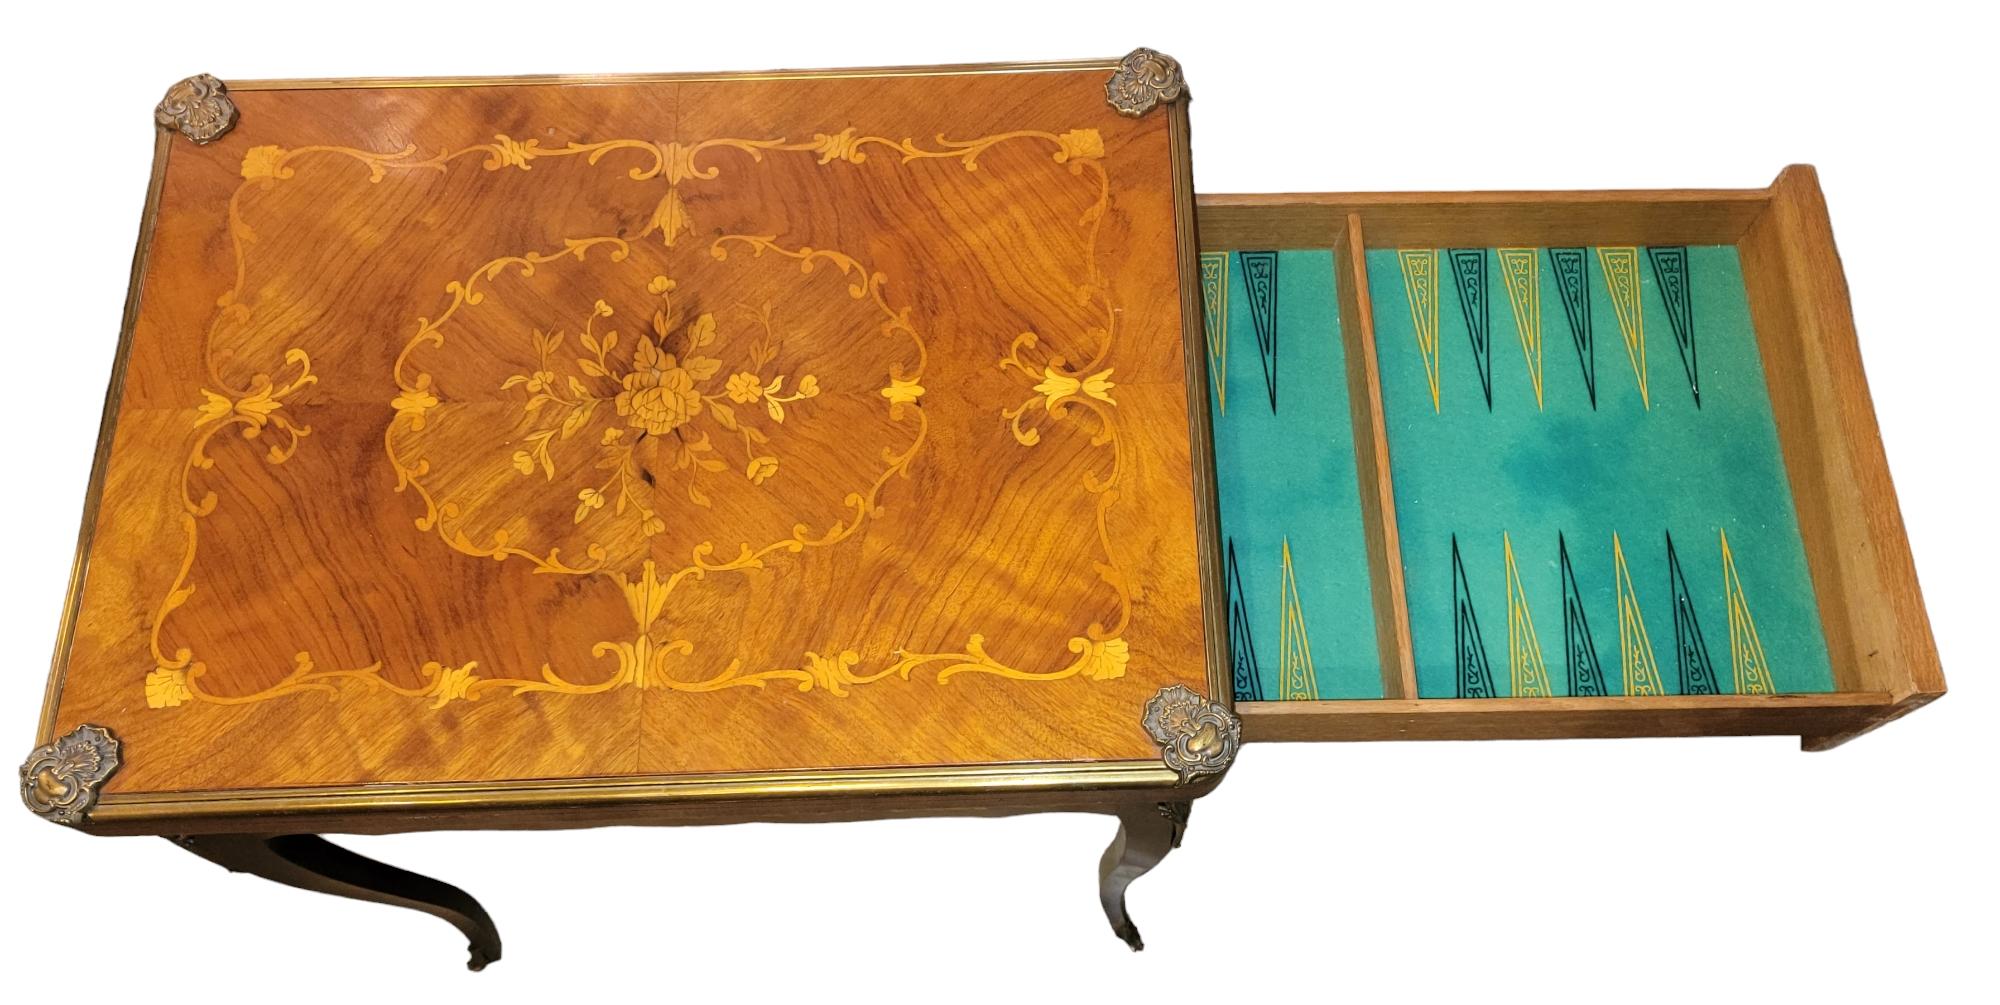 Antique Walnut French game table with ormolu mounts, slide-out felt-lined backgammon board, reverse top for card games. Drawer has slide our Backgammon board within. Table only There are no game chips.

 Circa 1920s 30h x 29L x 21w on floor.
